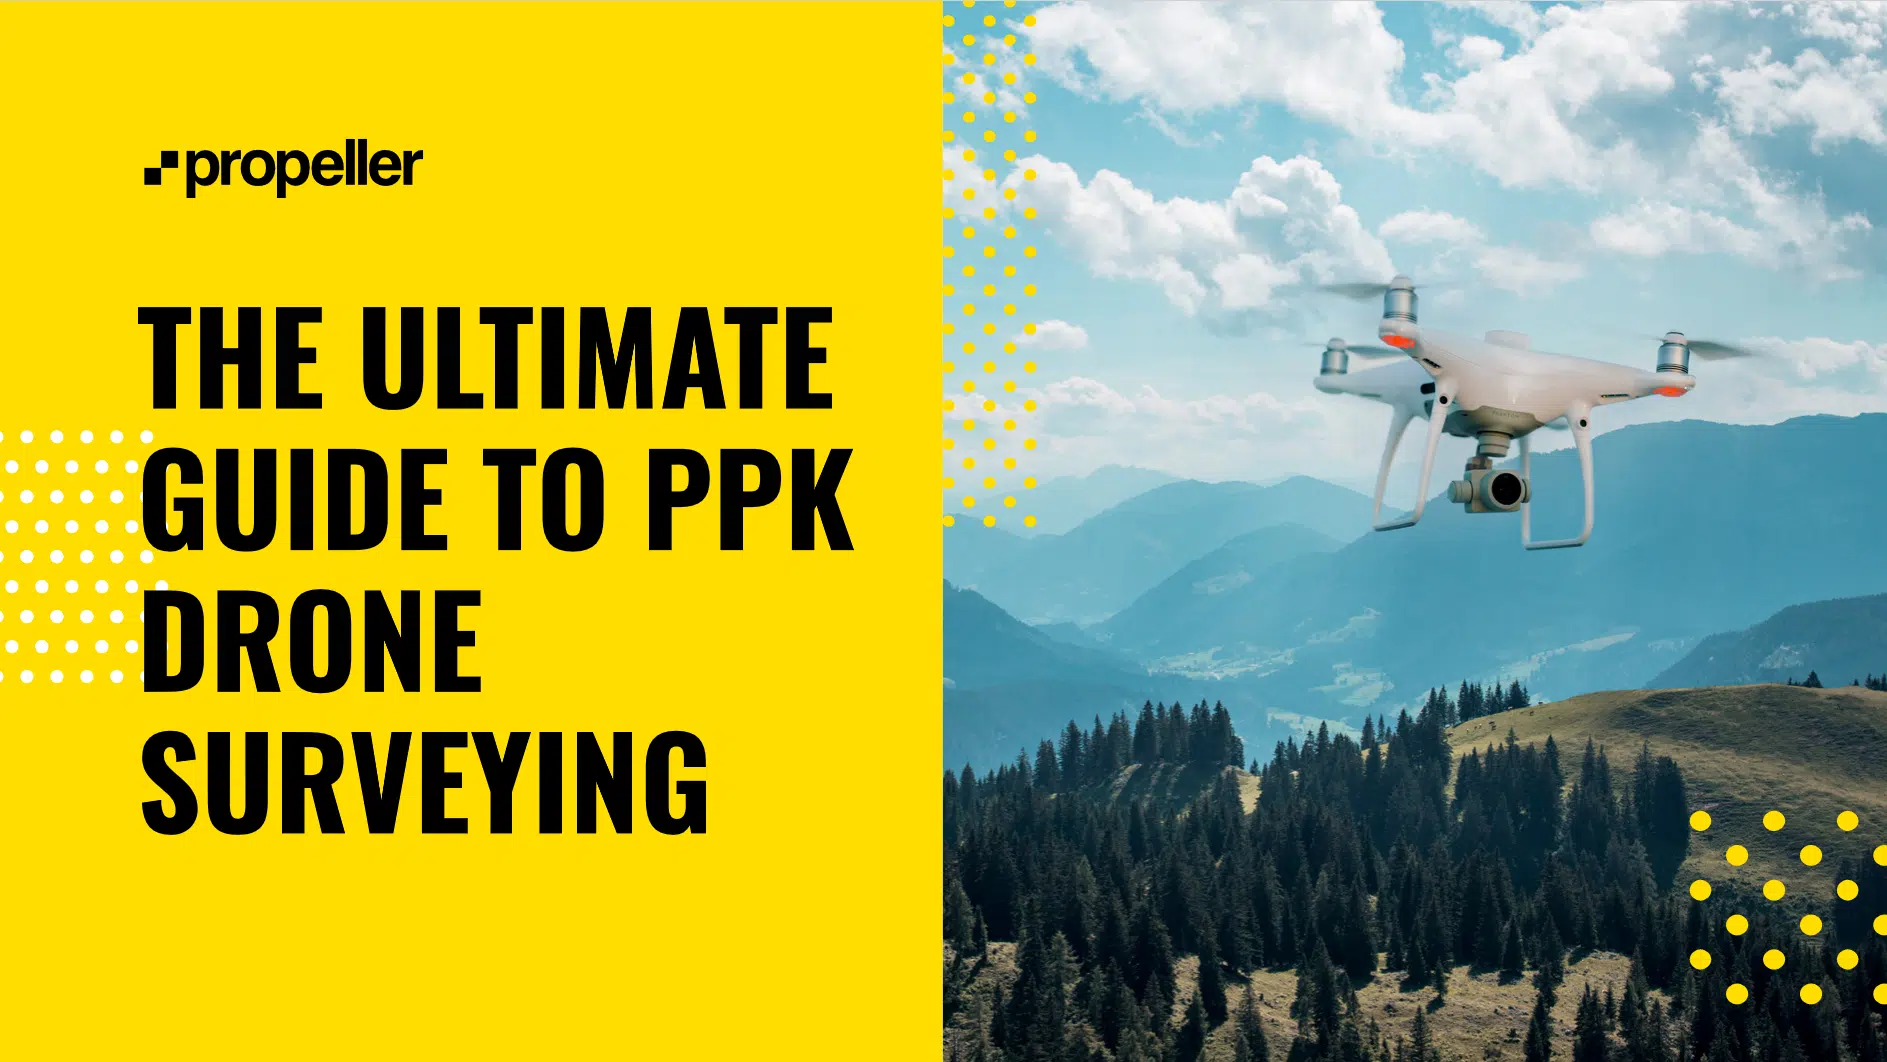 The ultimate guide to PPK drone surveying